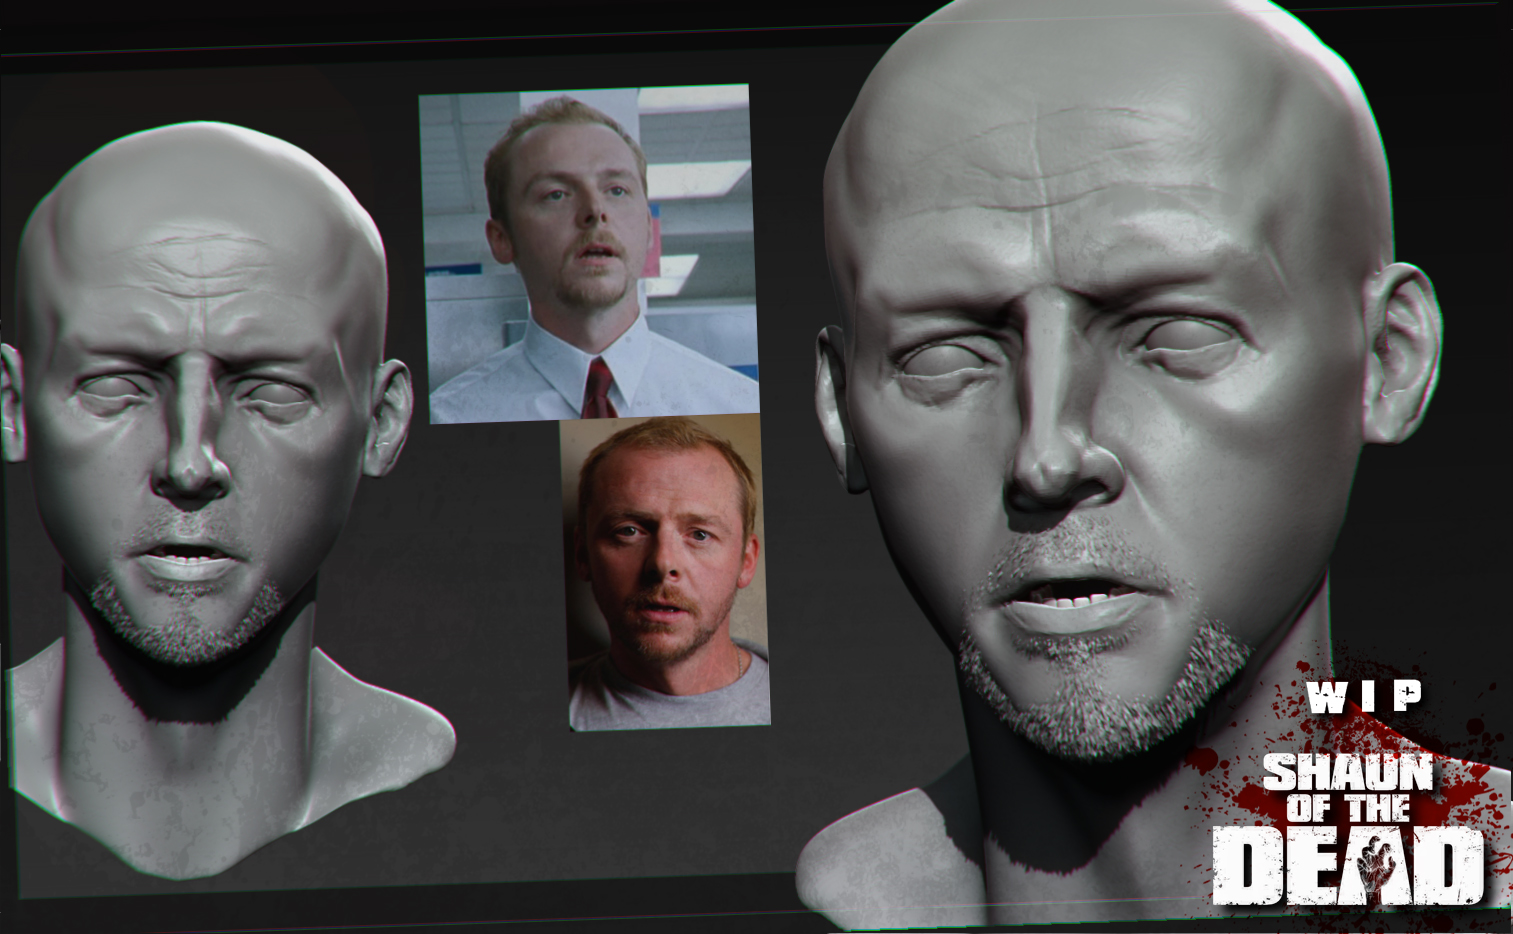 shaun_of_the_dead__moviefest_comp__wip_01_by_duncanfraser-d6aty86.jpg